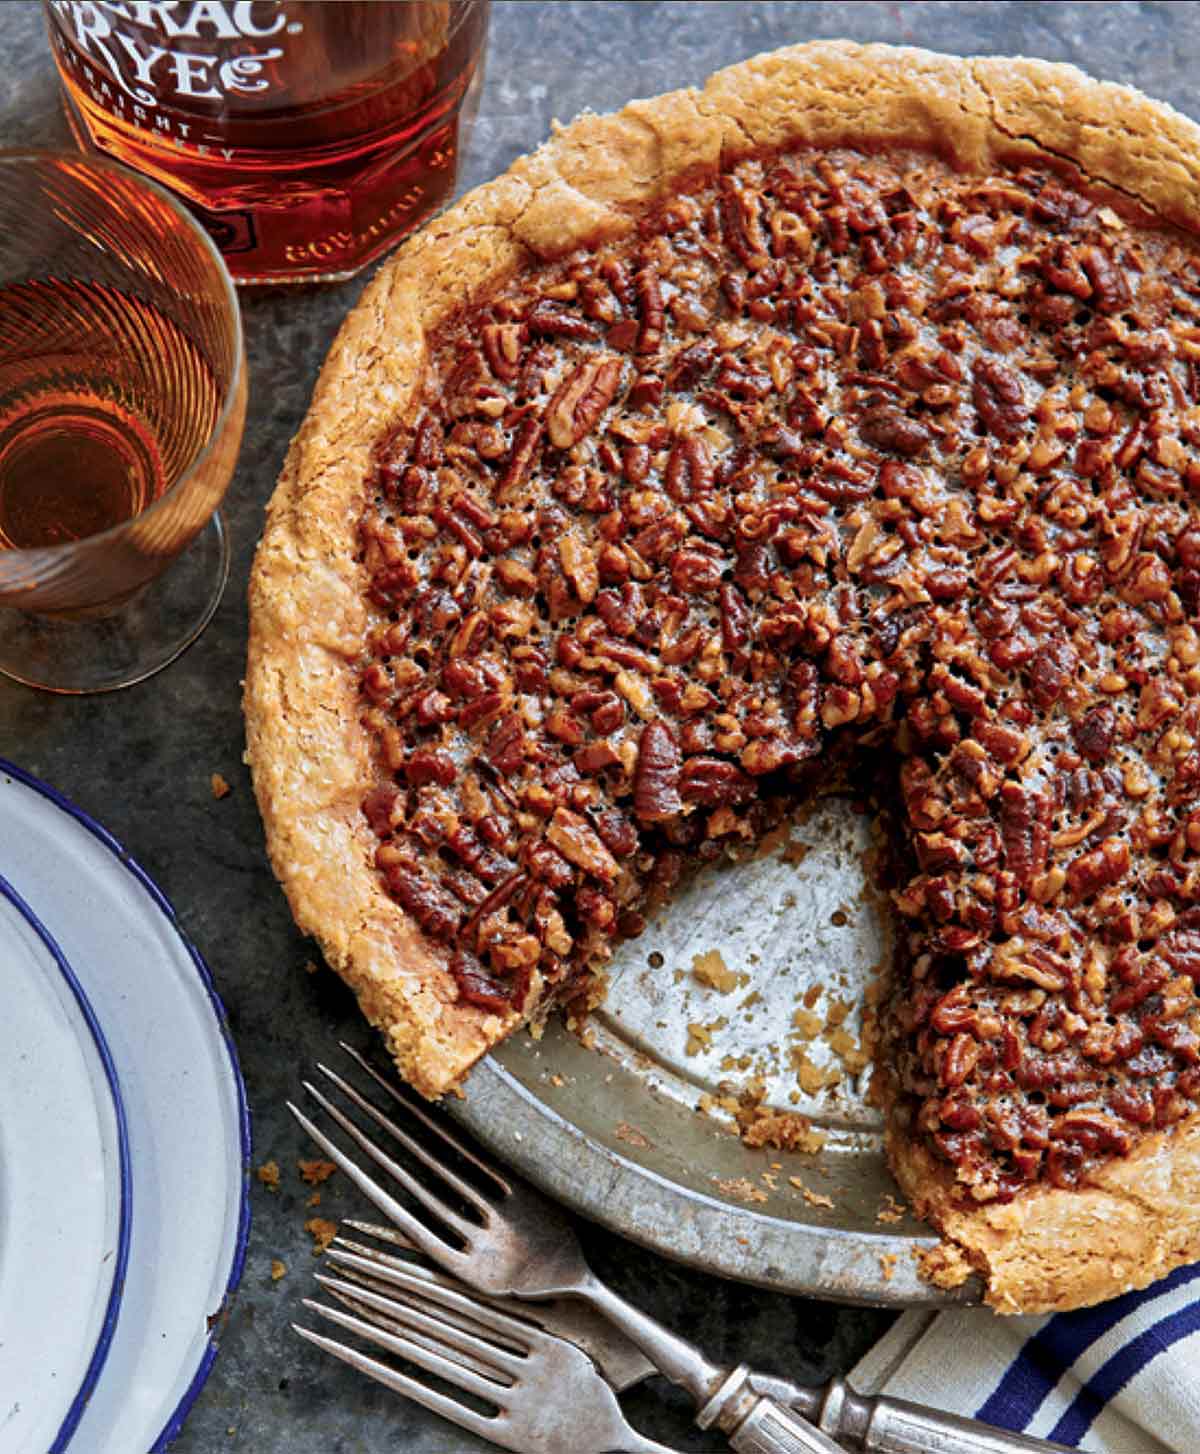 A maple pecan pie in a metal pie plate with one slice missing and forks, plates, and a bottle of rye whiskey beside the pie.